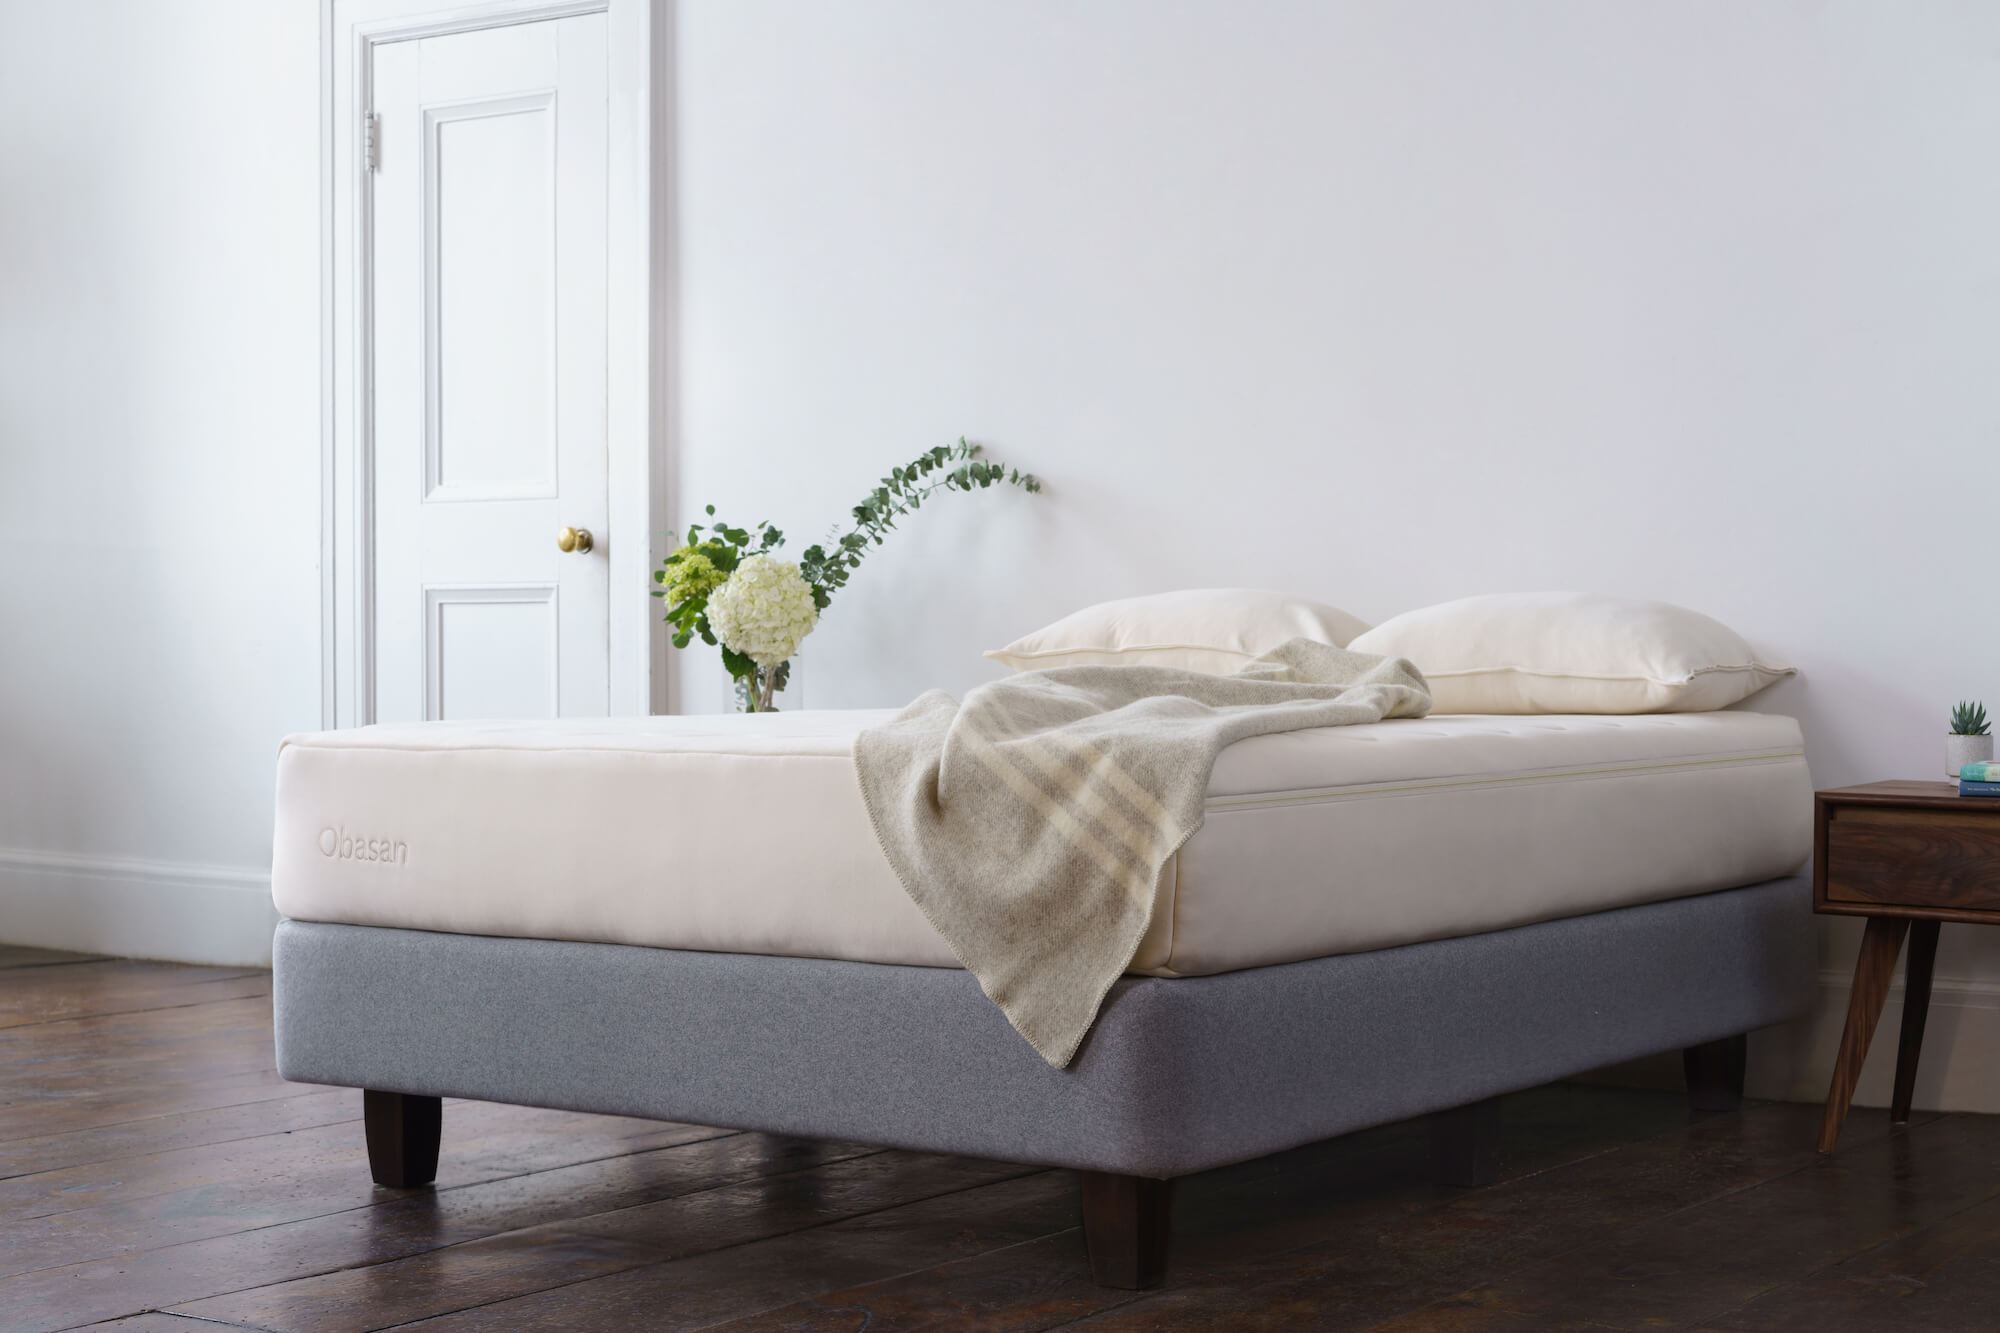 Obasan Mattresses. Made in Canada. Organic mattresses made with the highest quality organic materials. 